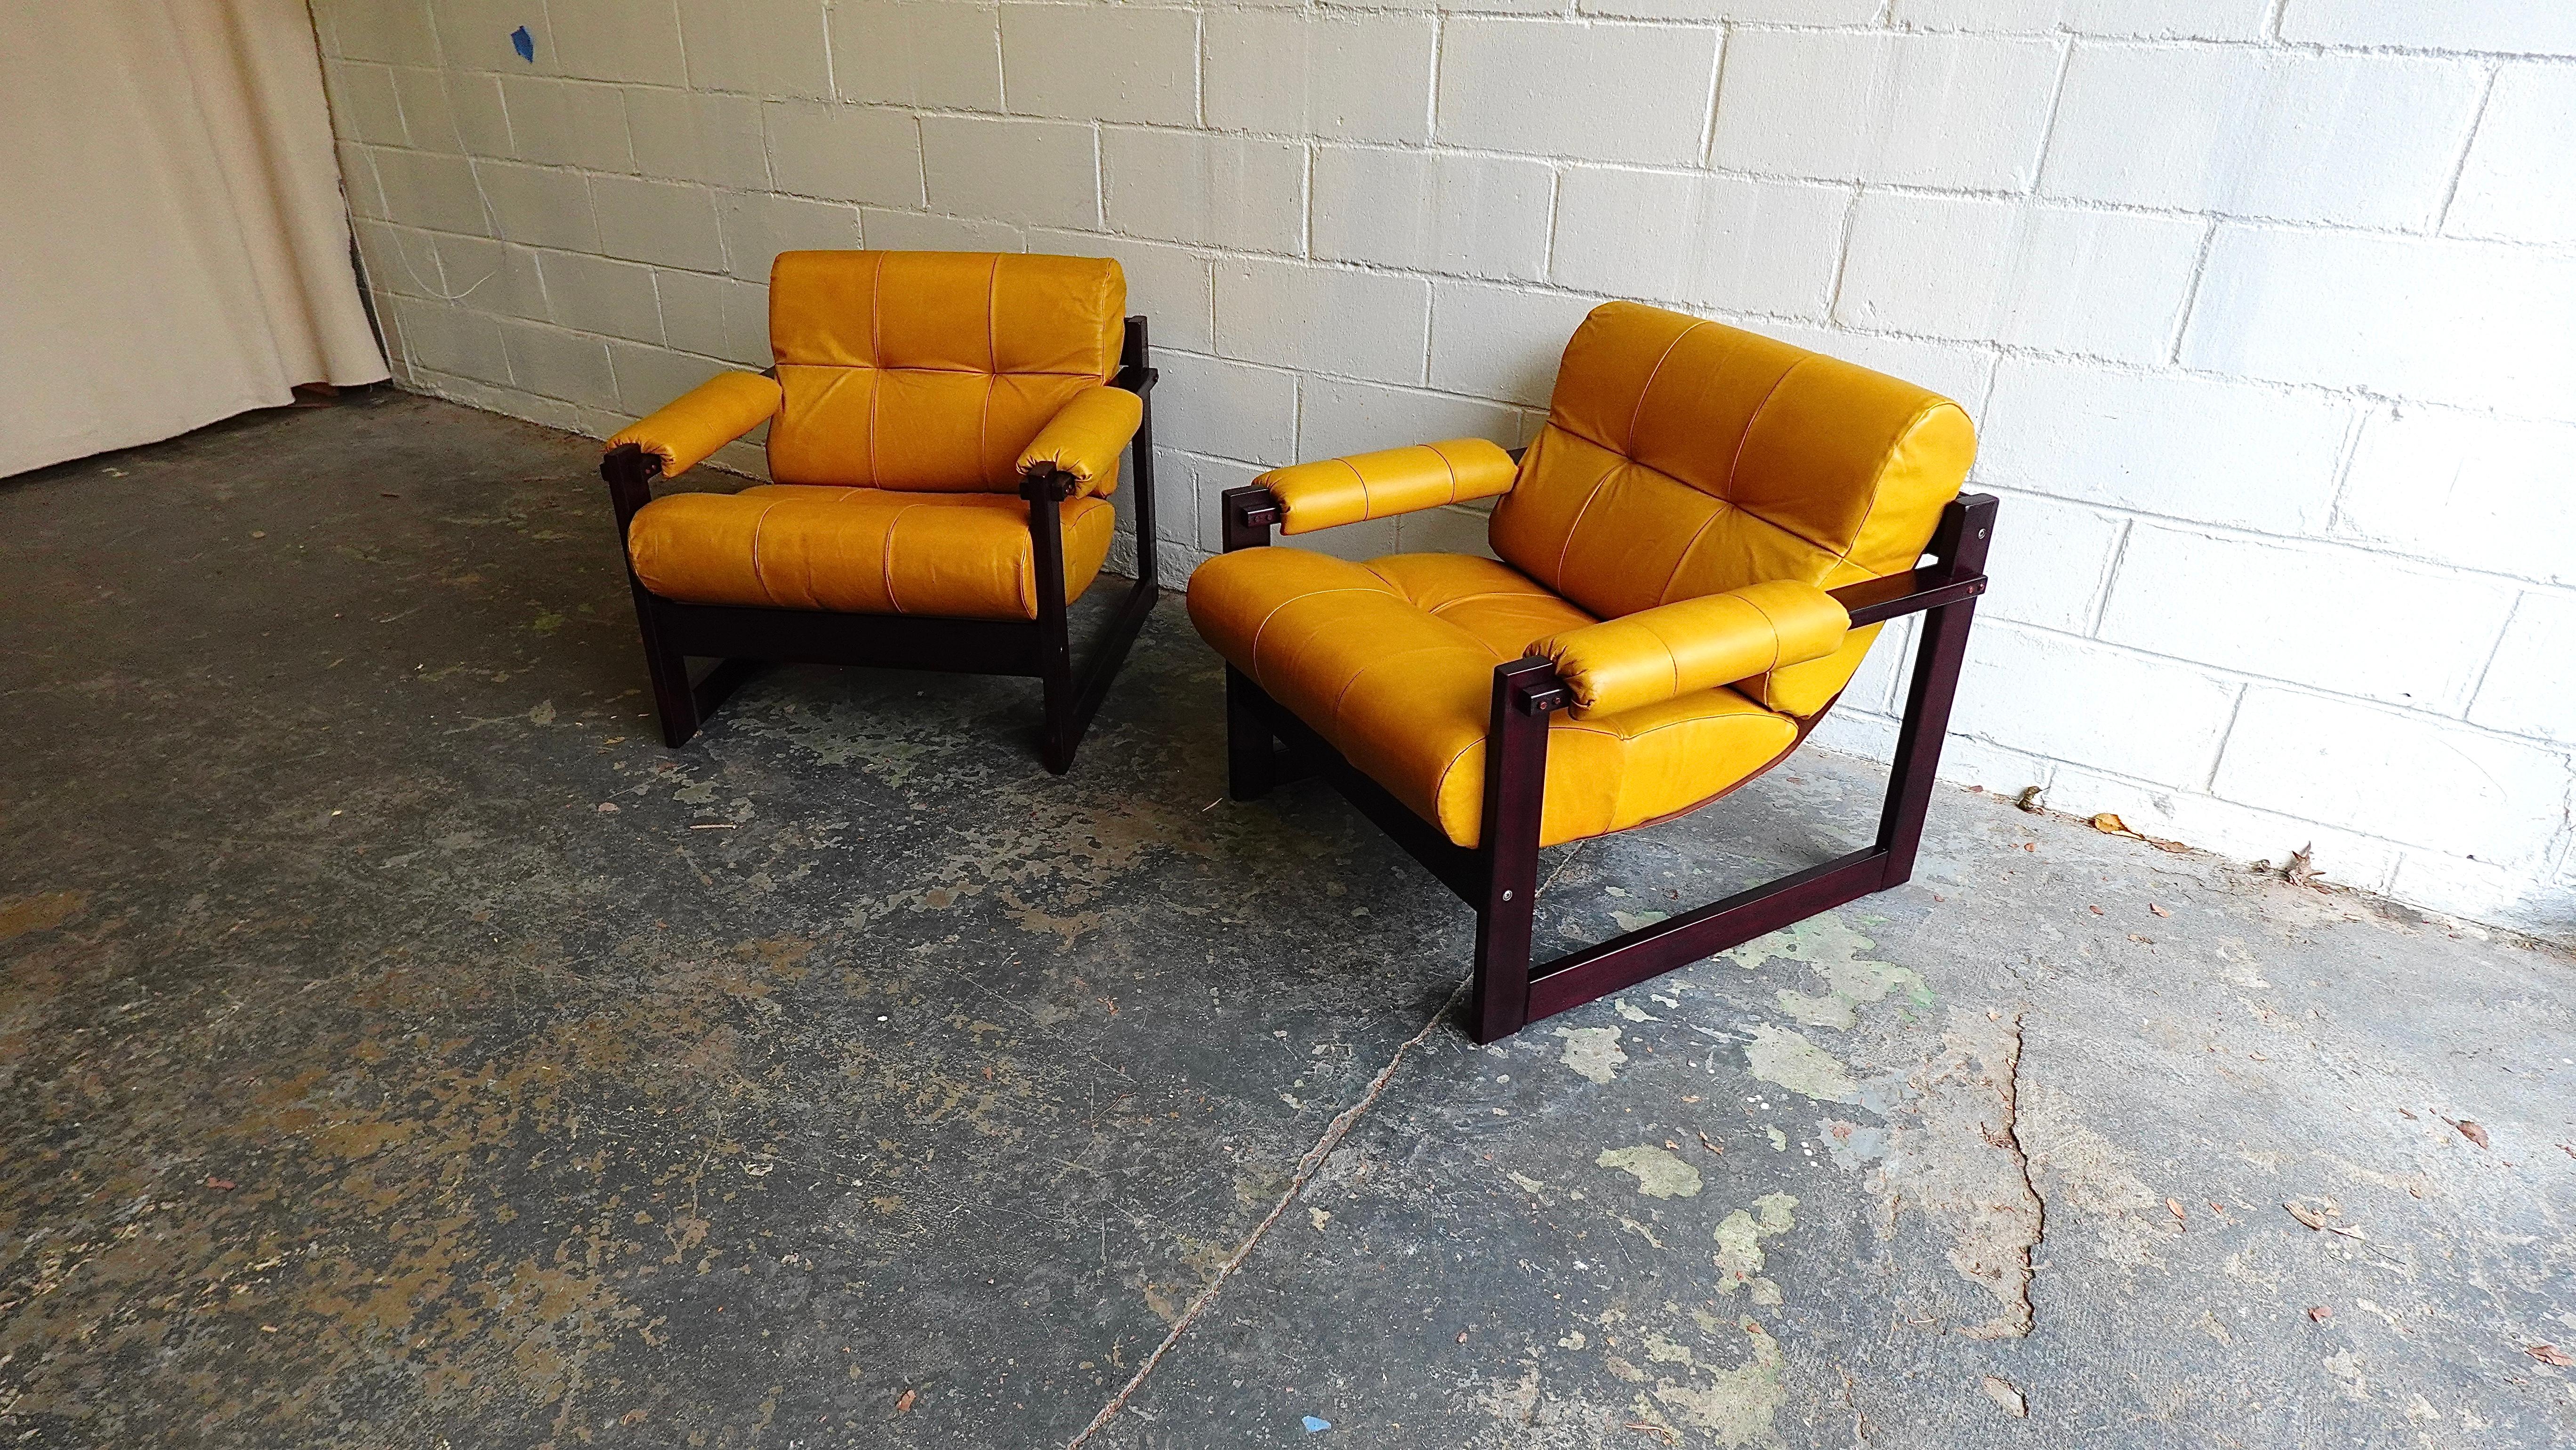 Pr. Percival Lafer MP-167 Lounge Chairs in Jatoba & Leather, 1970s For Sale 10